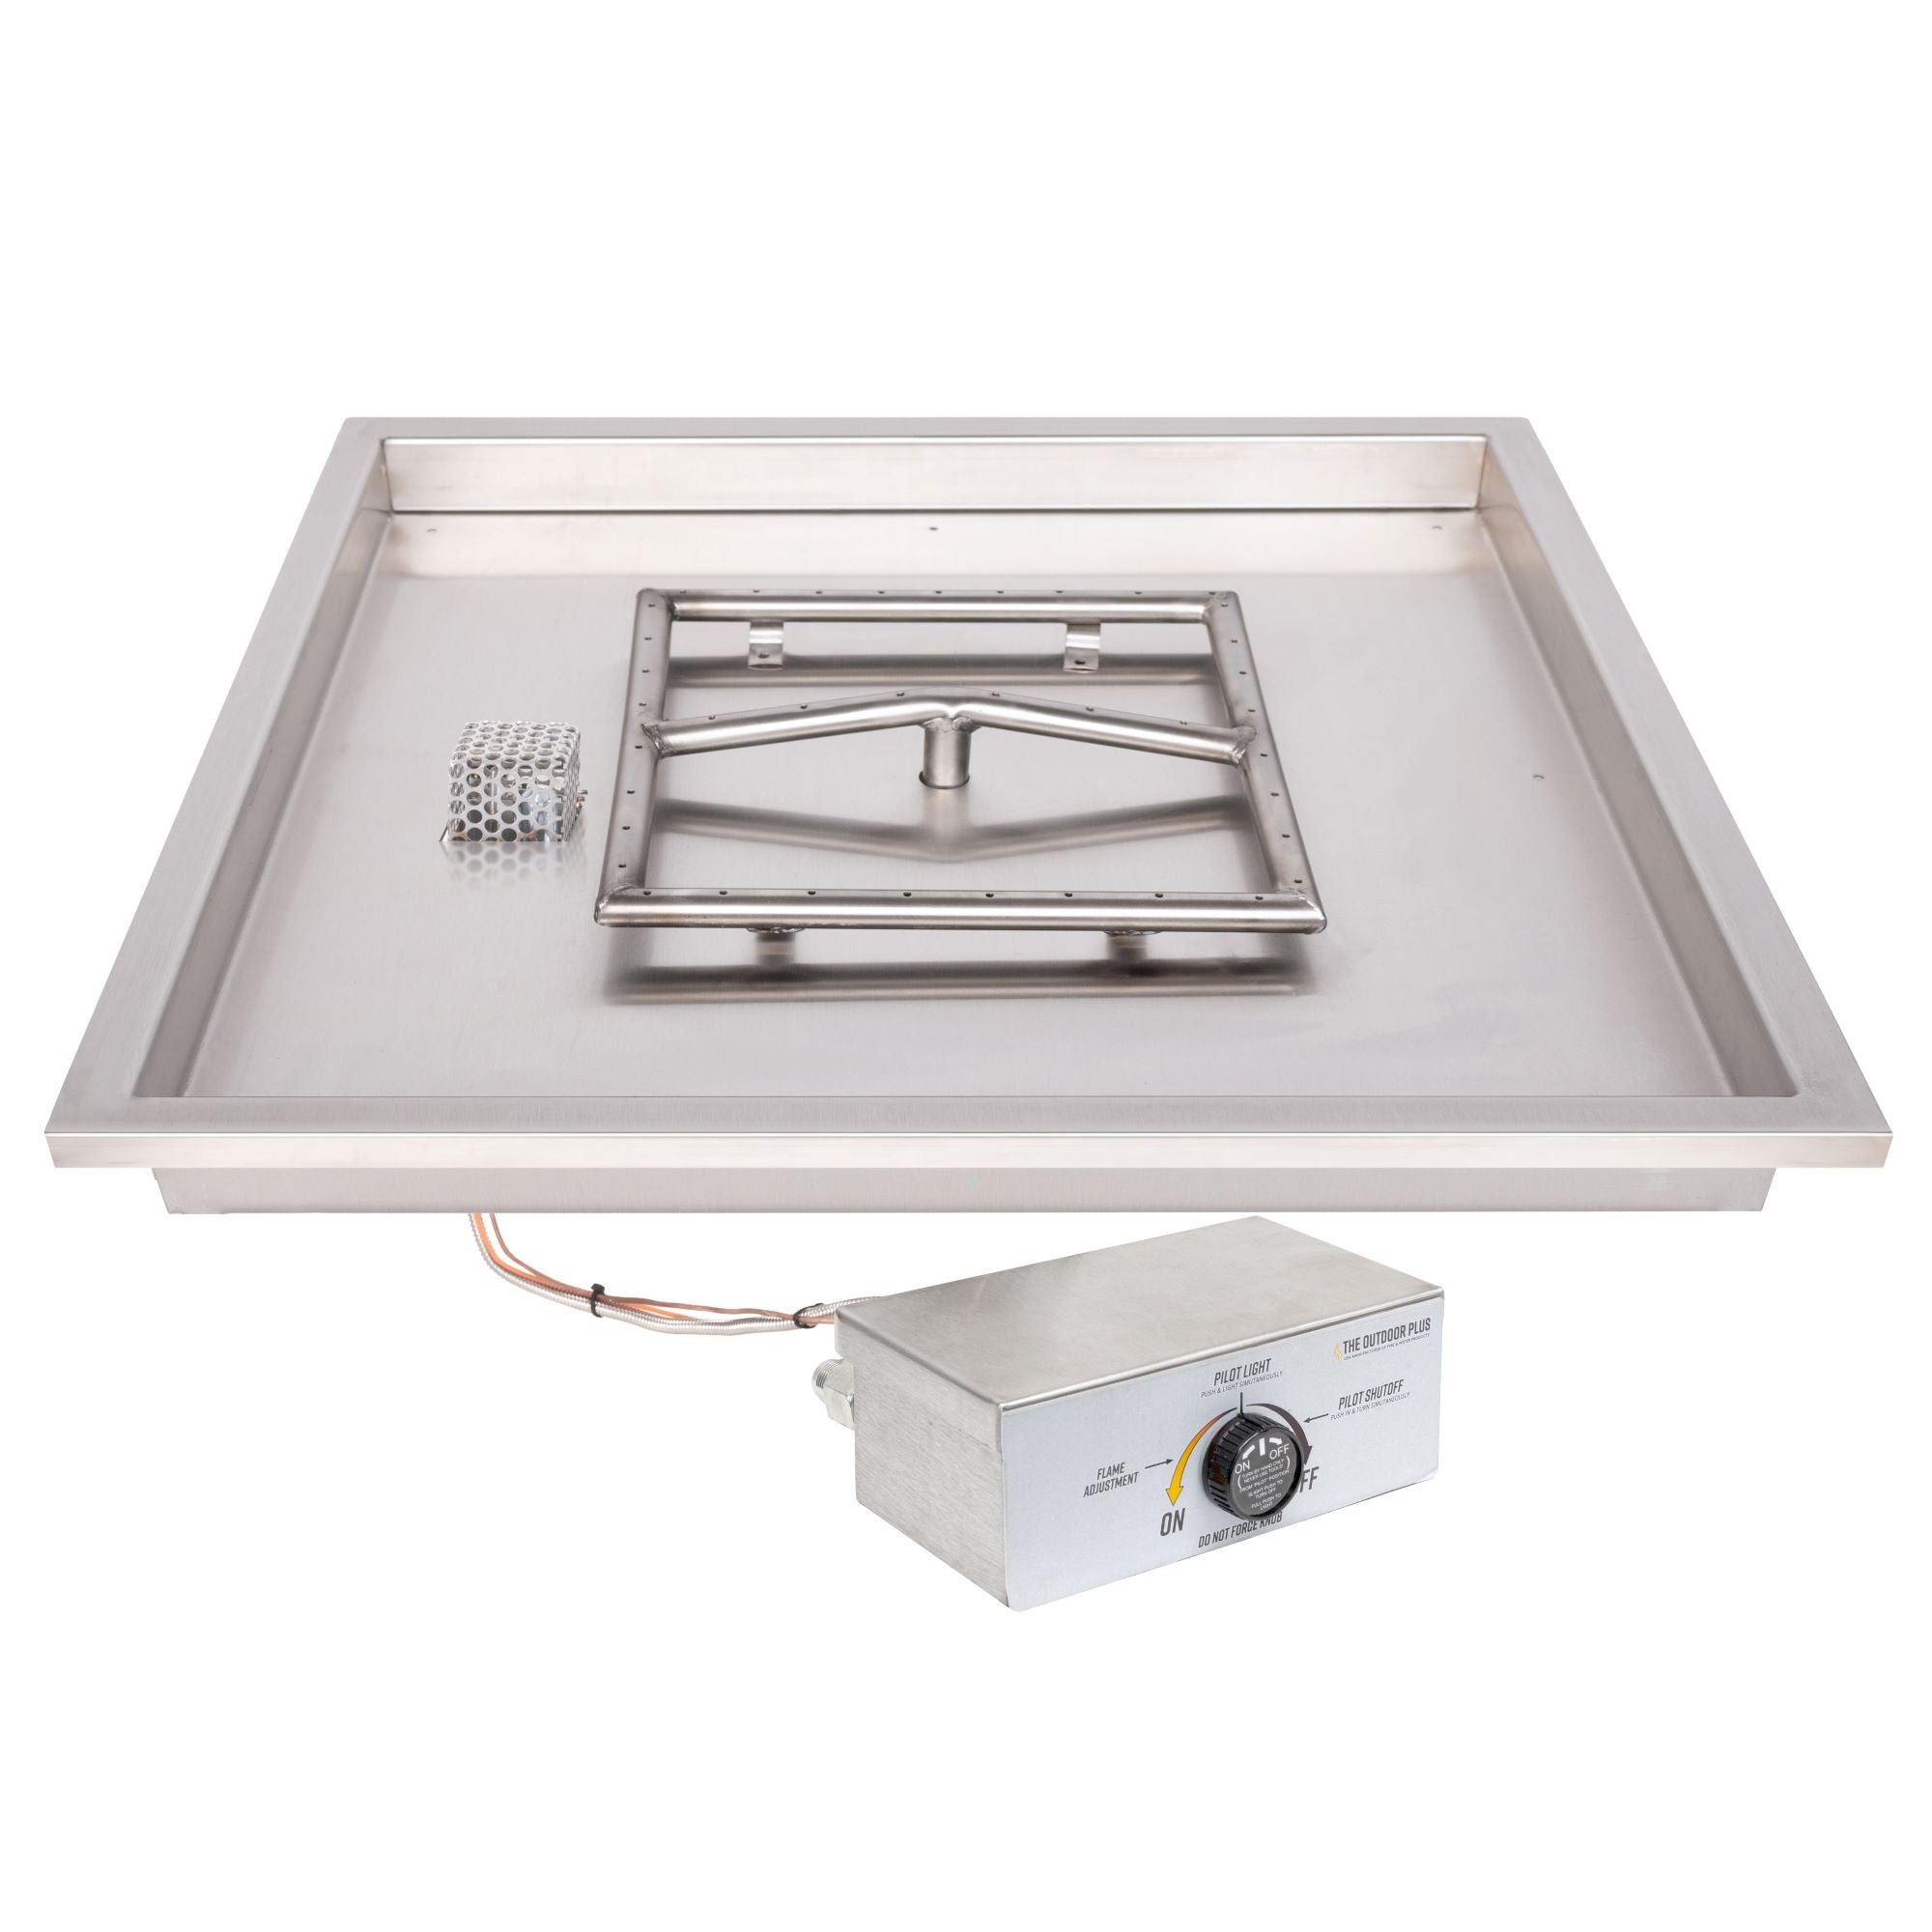 The Outdoor Plus Squared Raised Lip Drop-in Pan with Stainless Steel Square Burner